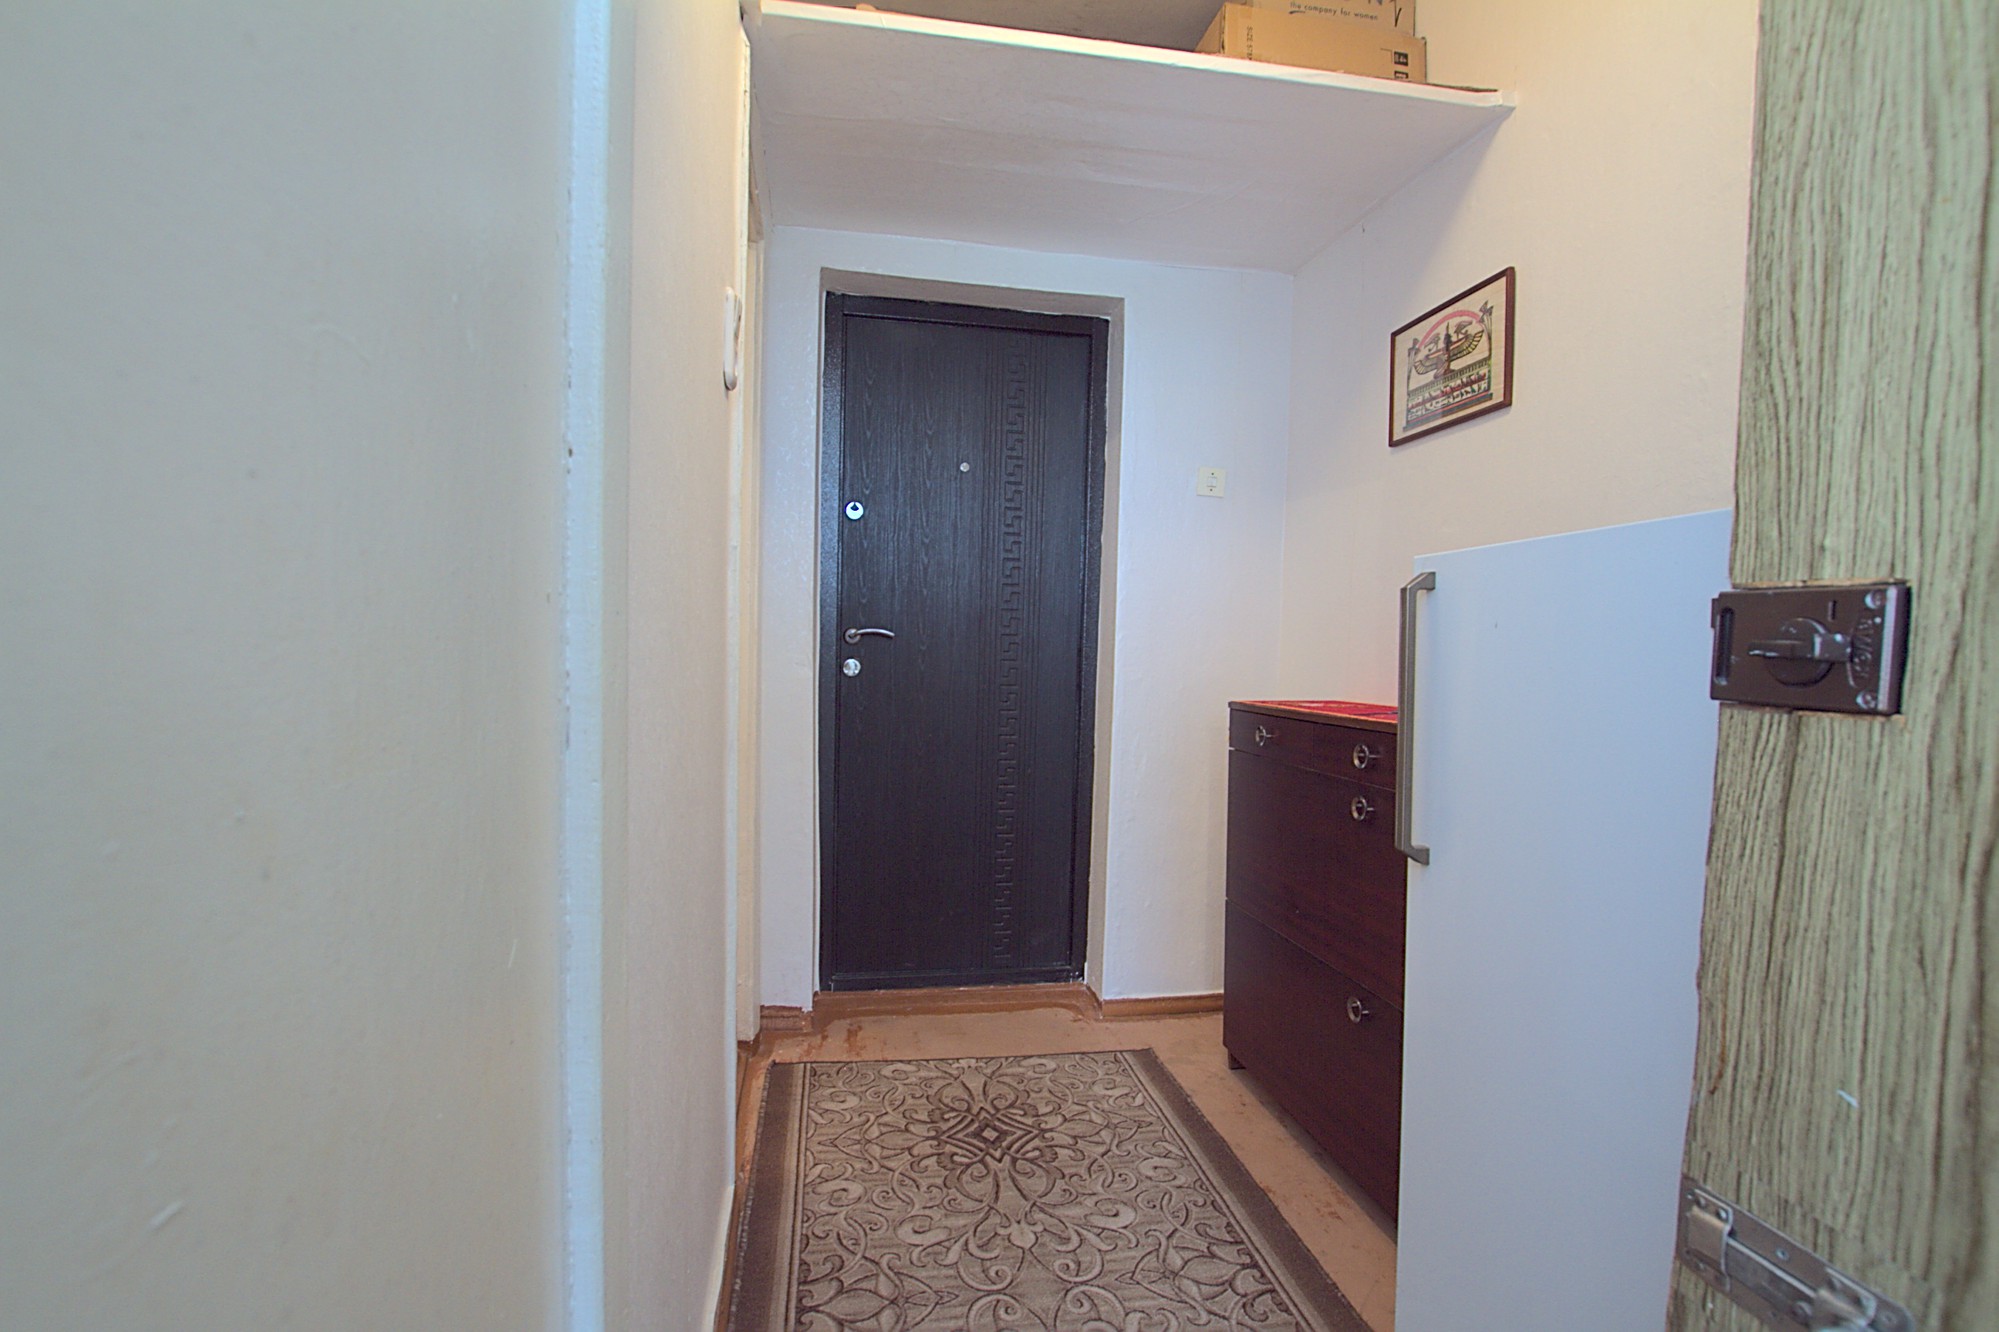 Cozy Nest is a 1 room apartment for rent in Chisinau, Moldova